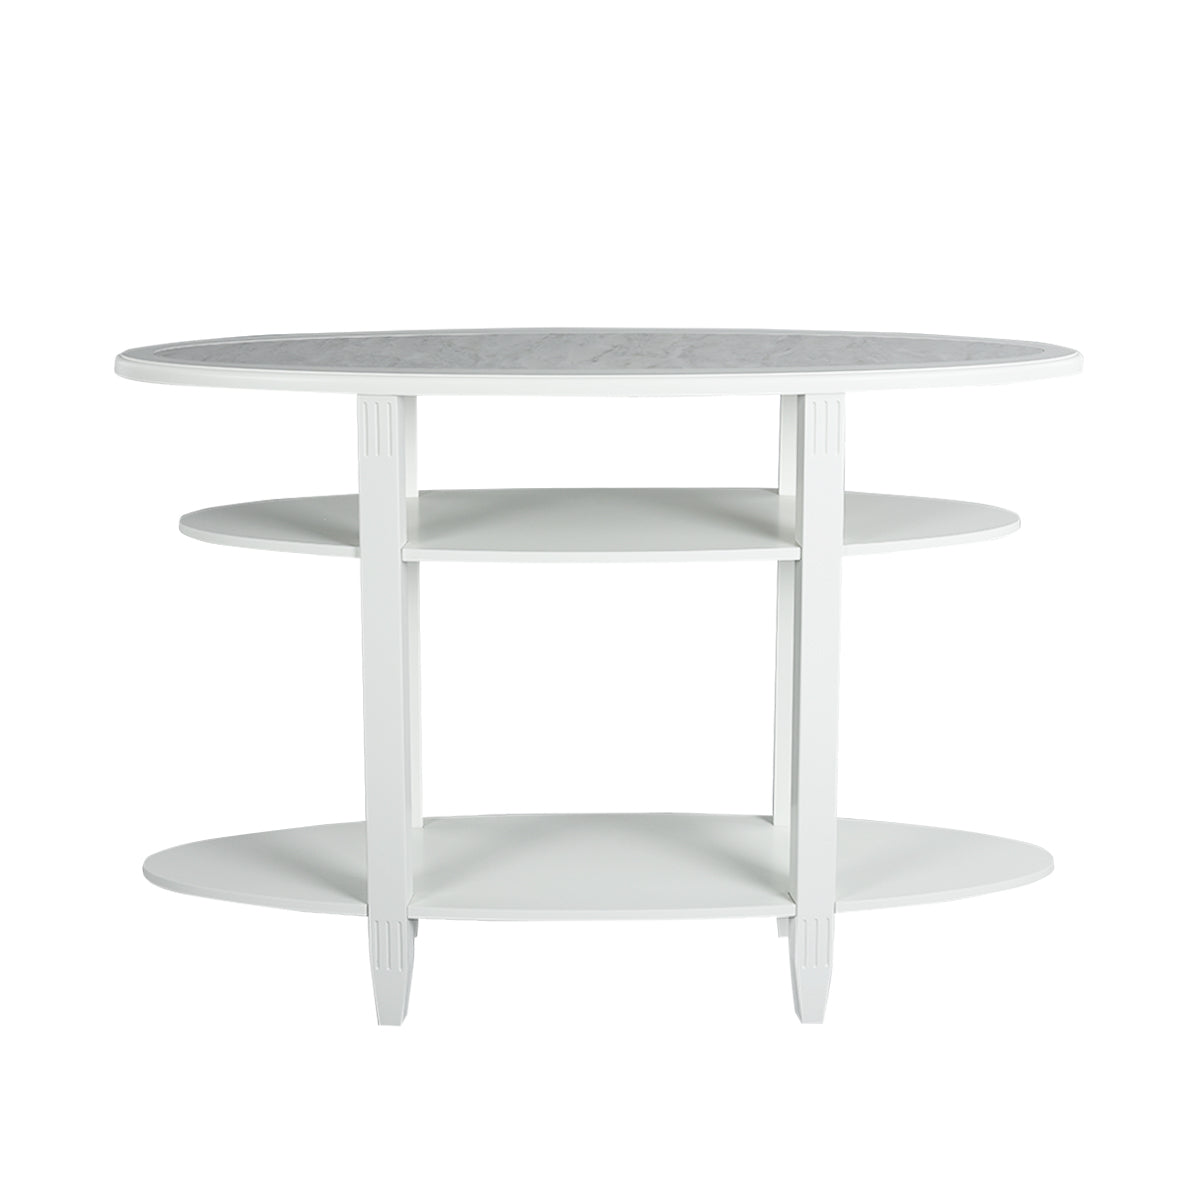 White oval coffee table with 3 wooden shelves - YEOMAN